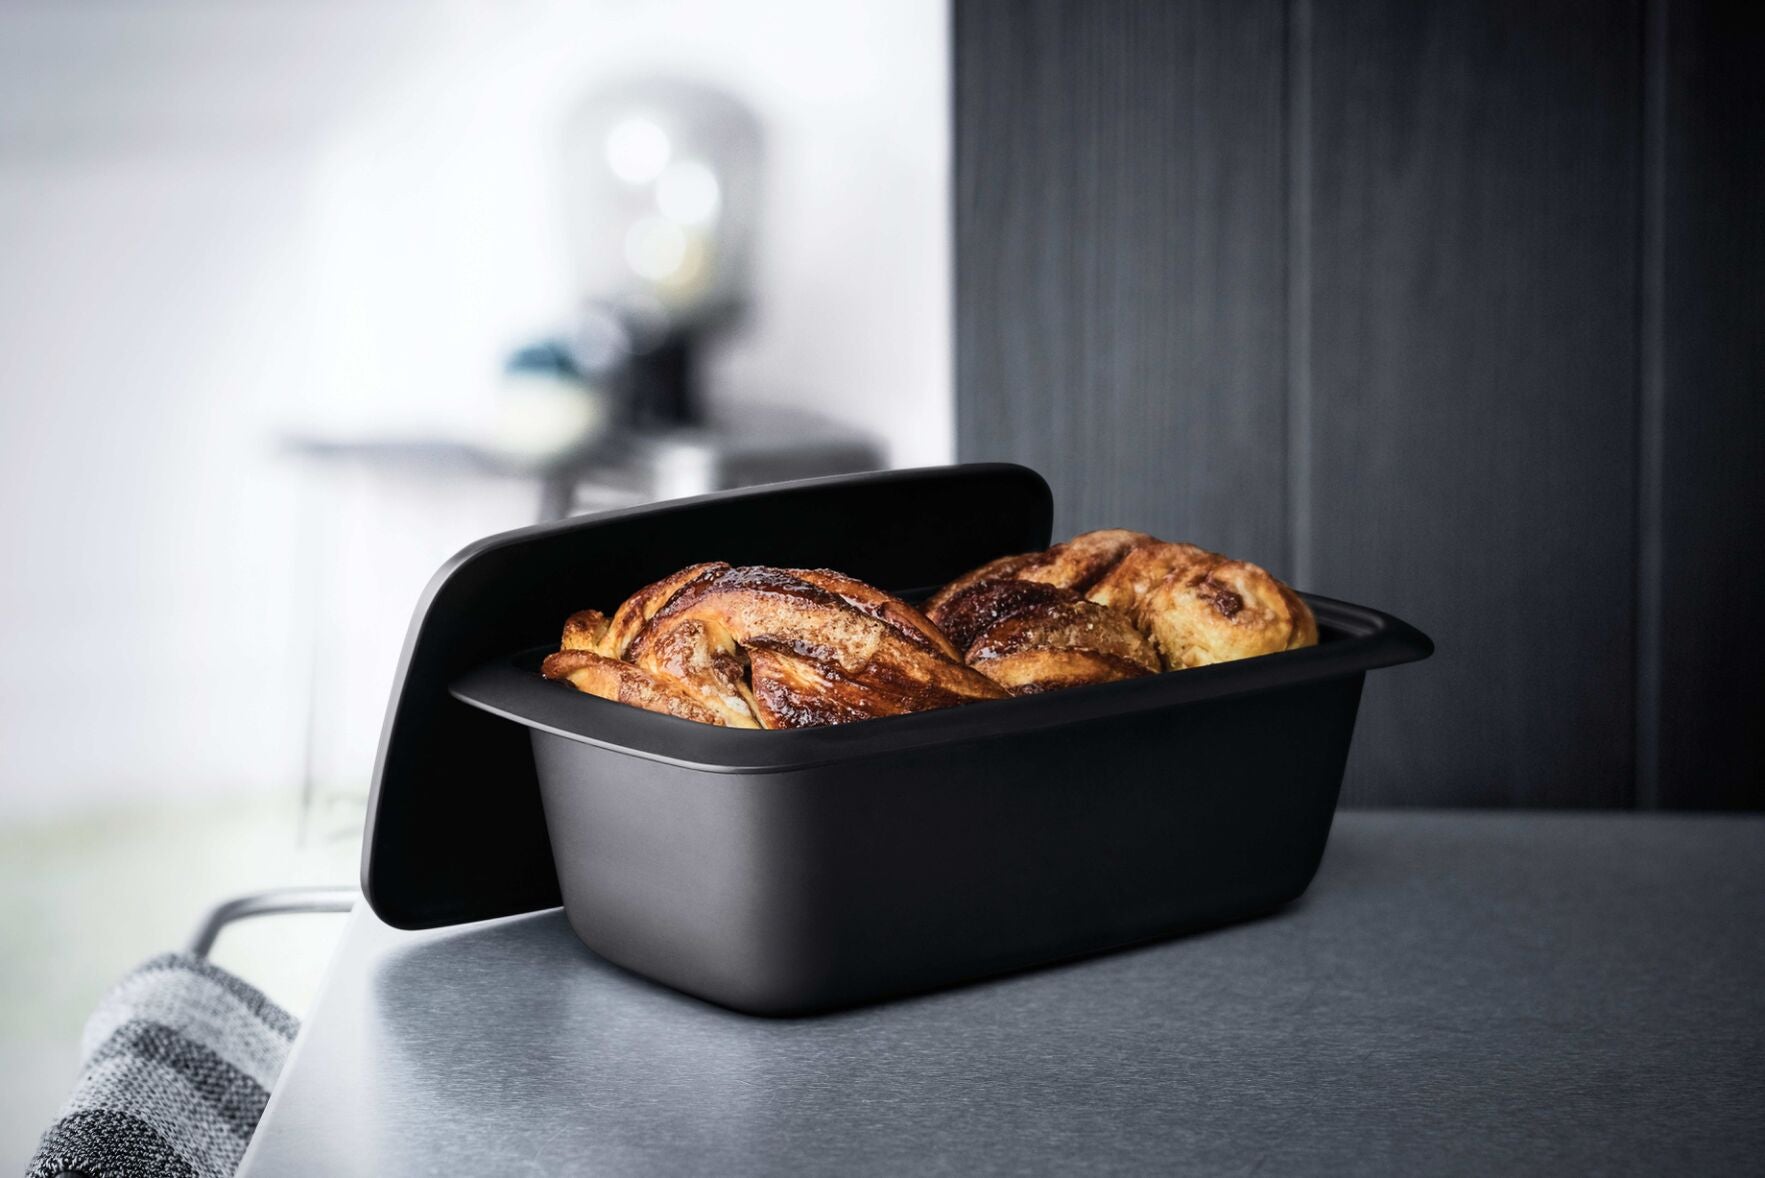 Tupperware Loaf Pan, Oven, Microwave Safe